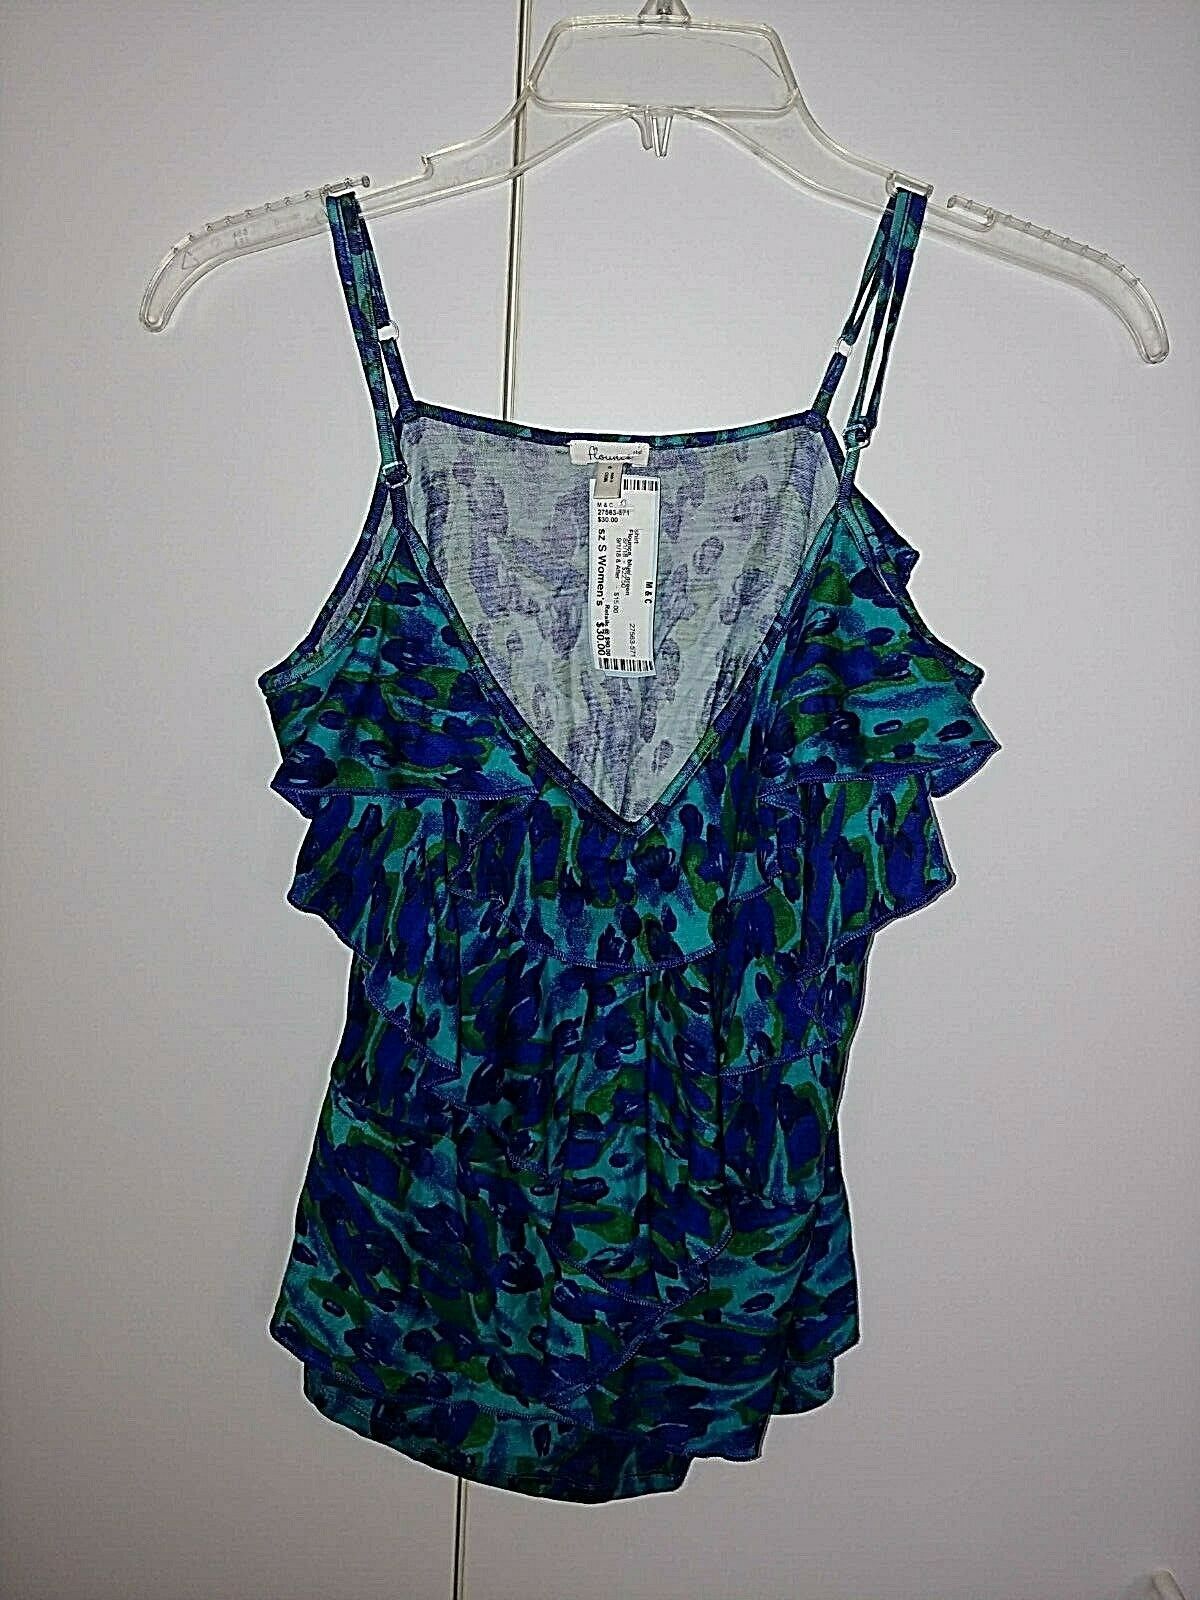 Primary image for FLOUNCE LADIES SLEEVELESS BLUE/GREEN RUFFLY KNIT TENCEL SUMMER TOP-S-NEW-CUTE